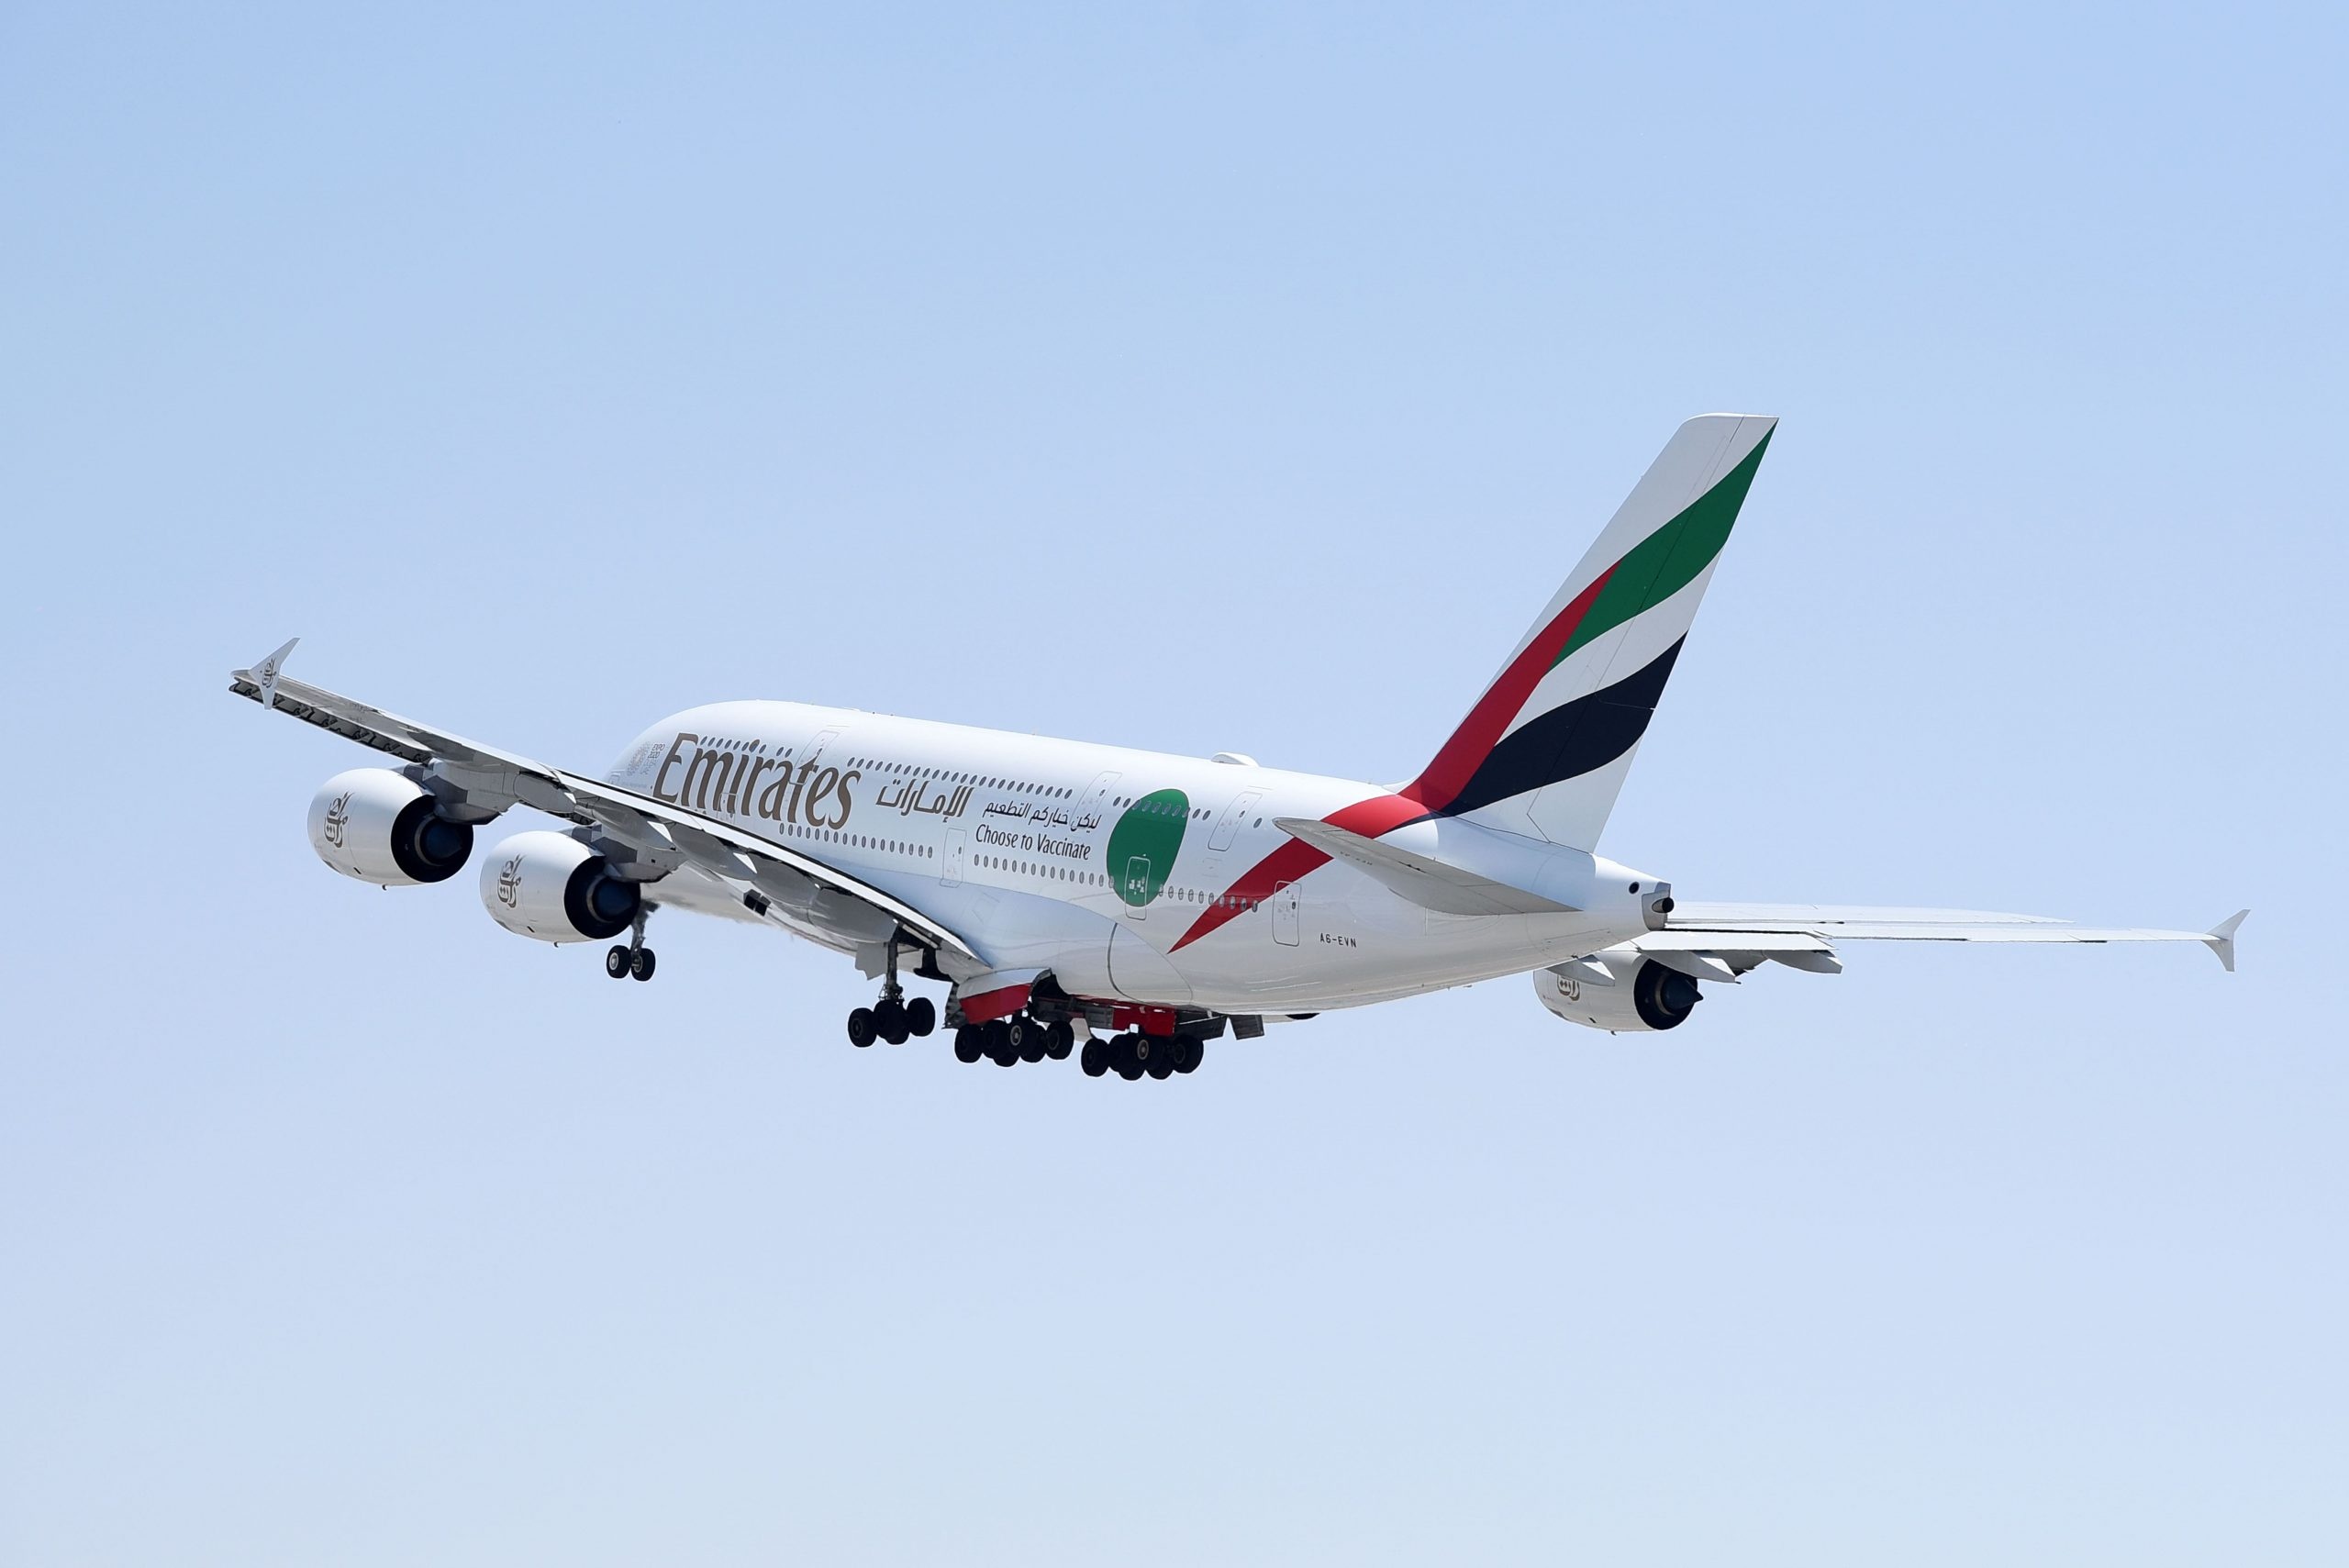 Emirates vaccinated flight, Aviation industry news, COVID-19 safety, Travel restrictions, 2560x1710 HD Desktop